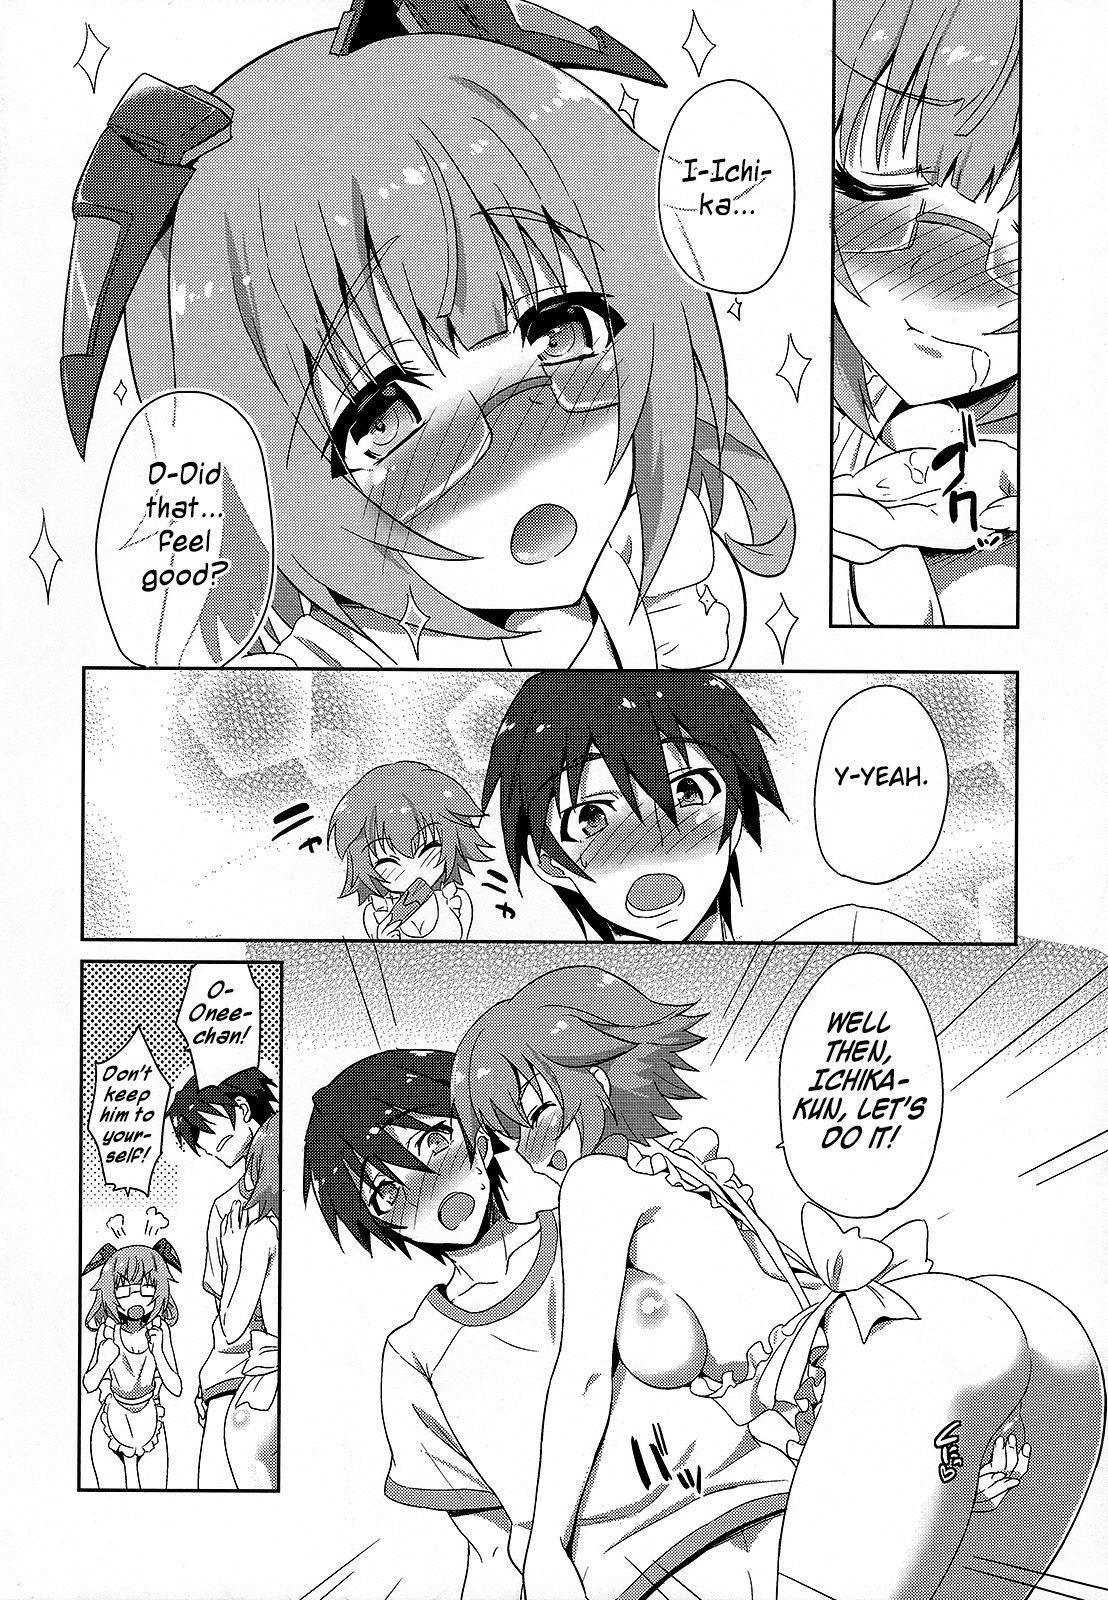 Classic IS ICHIKA LOVE SISTERS!! - Infinite stratos Best Blowjob - Page 9